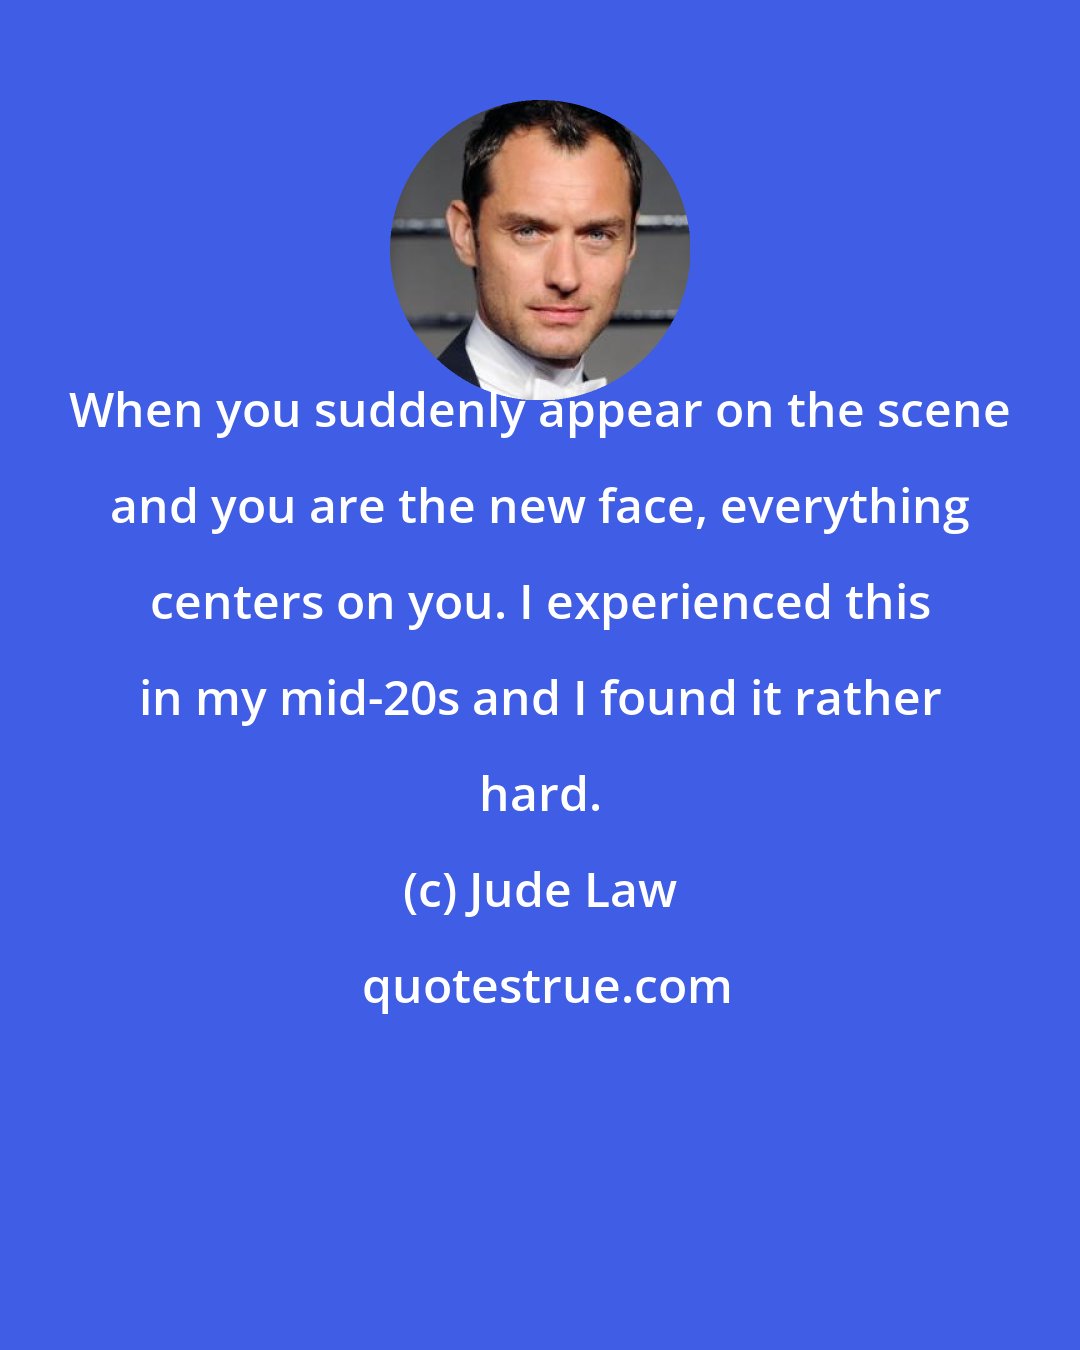 Jude Law: When you suddenly appear on the scene and you are the new face, everything centers on you. I experienced this in my mid-20s and I found it rather hard.